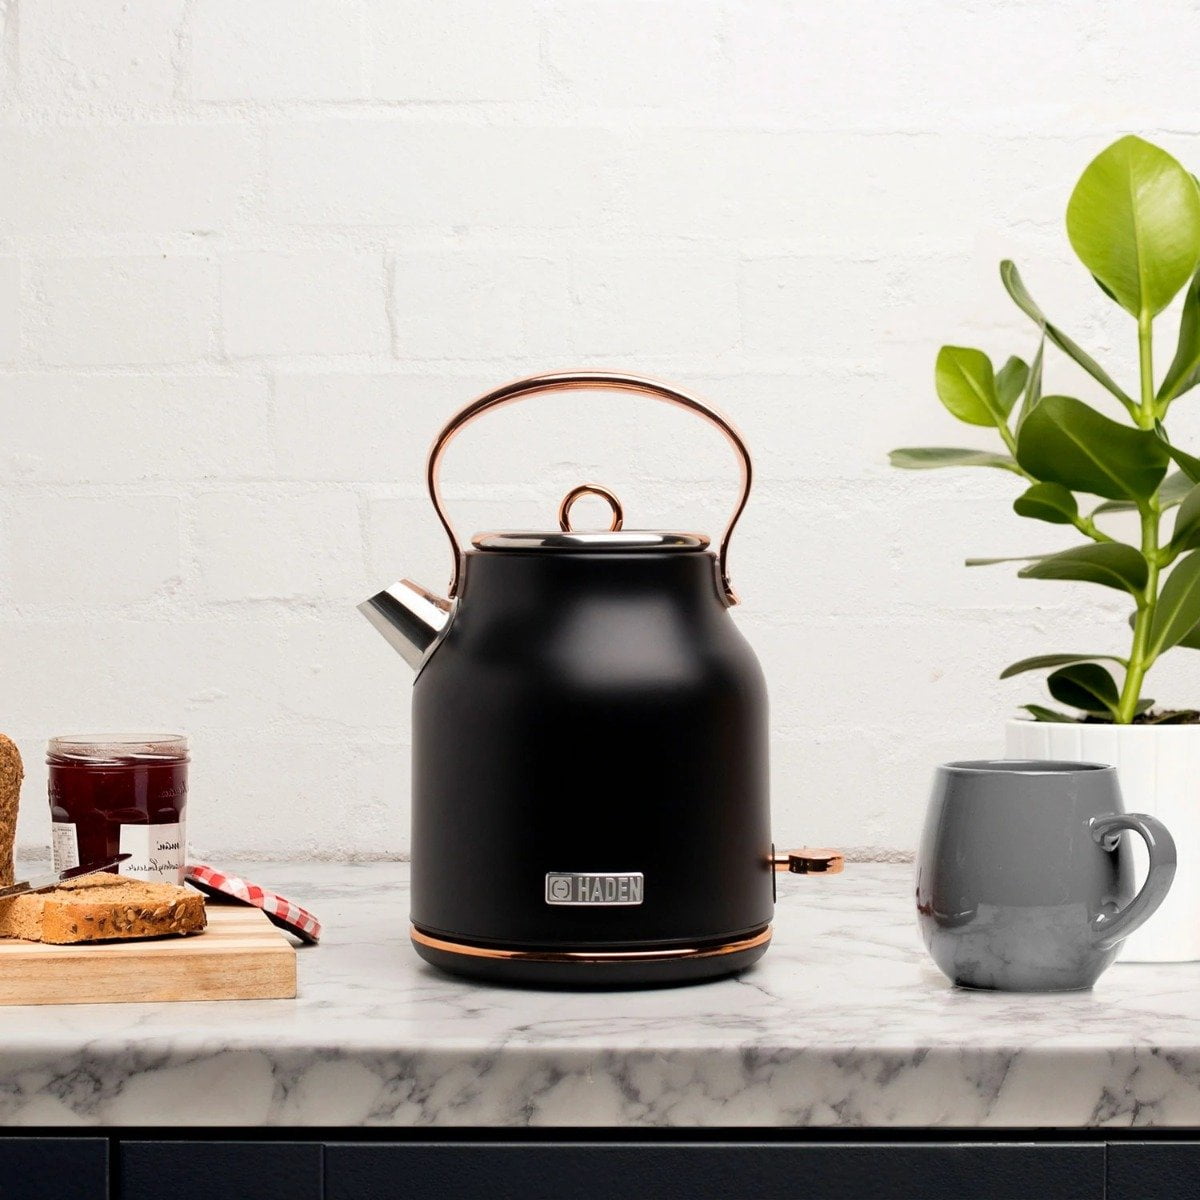 Haden Heritage Stainless Steel Electric Kettle - Black/Copper 1.7 L